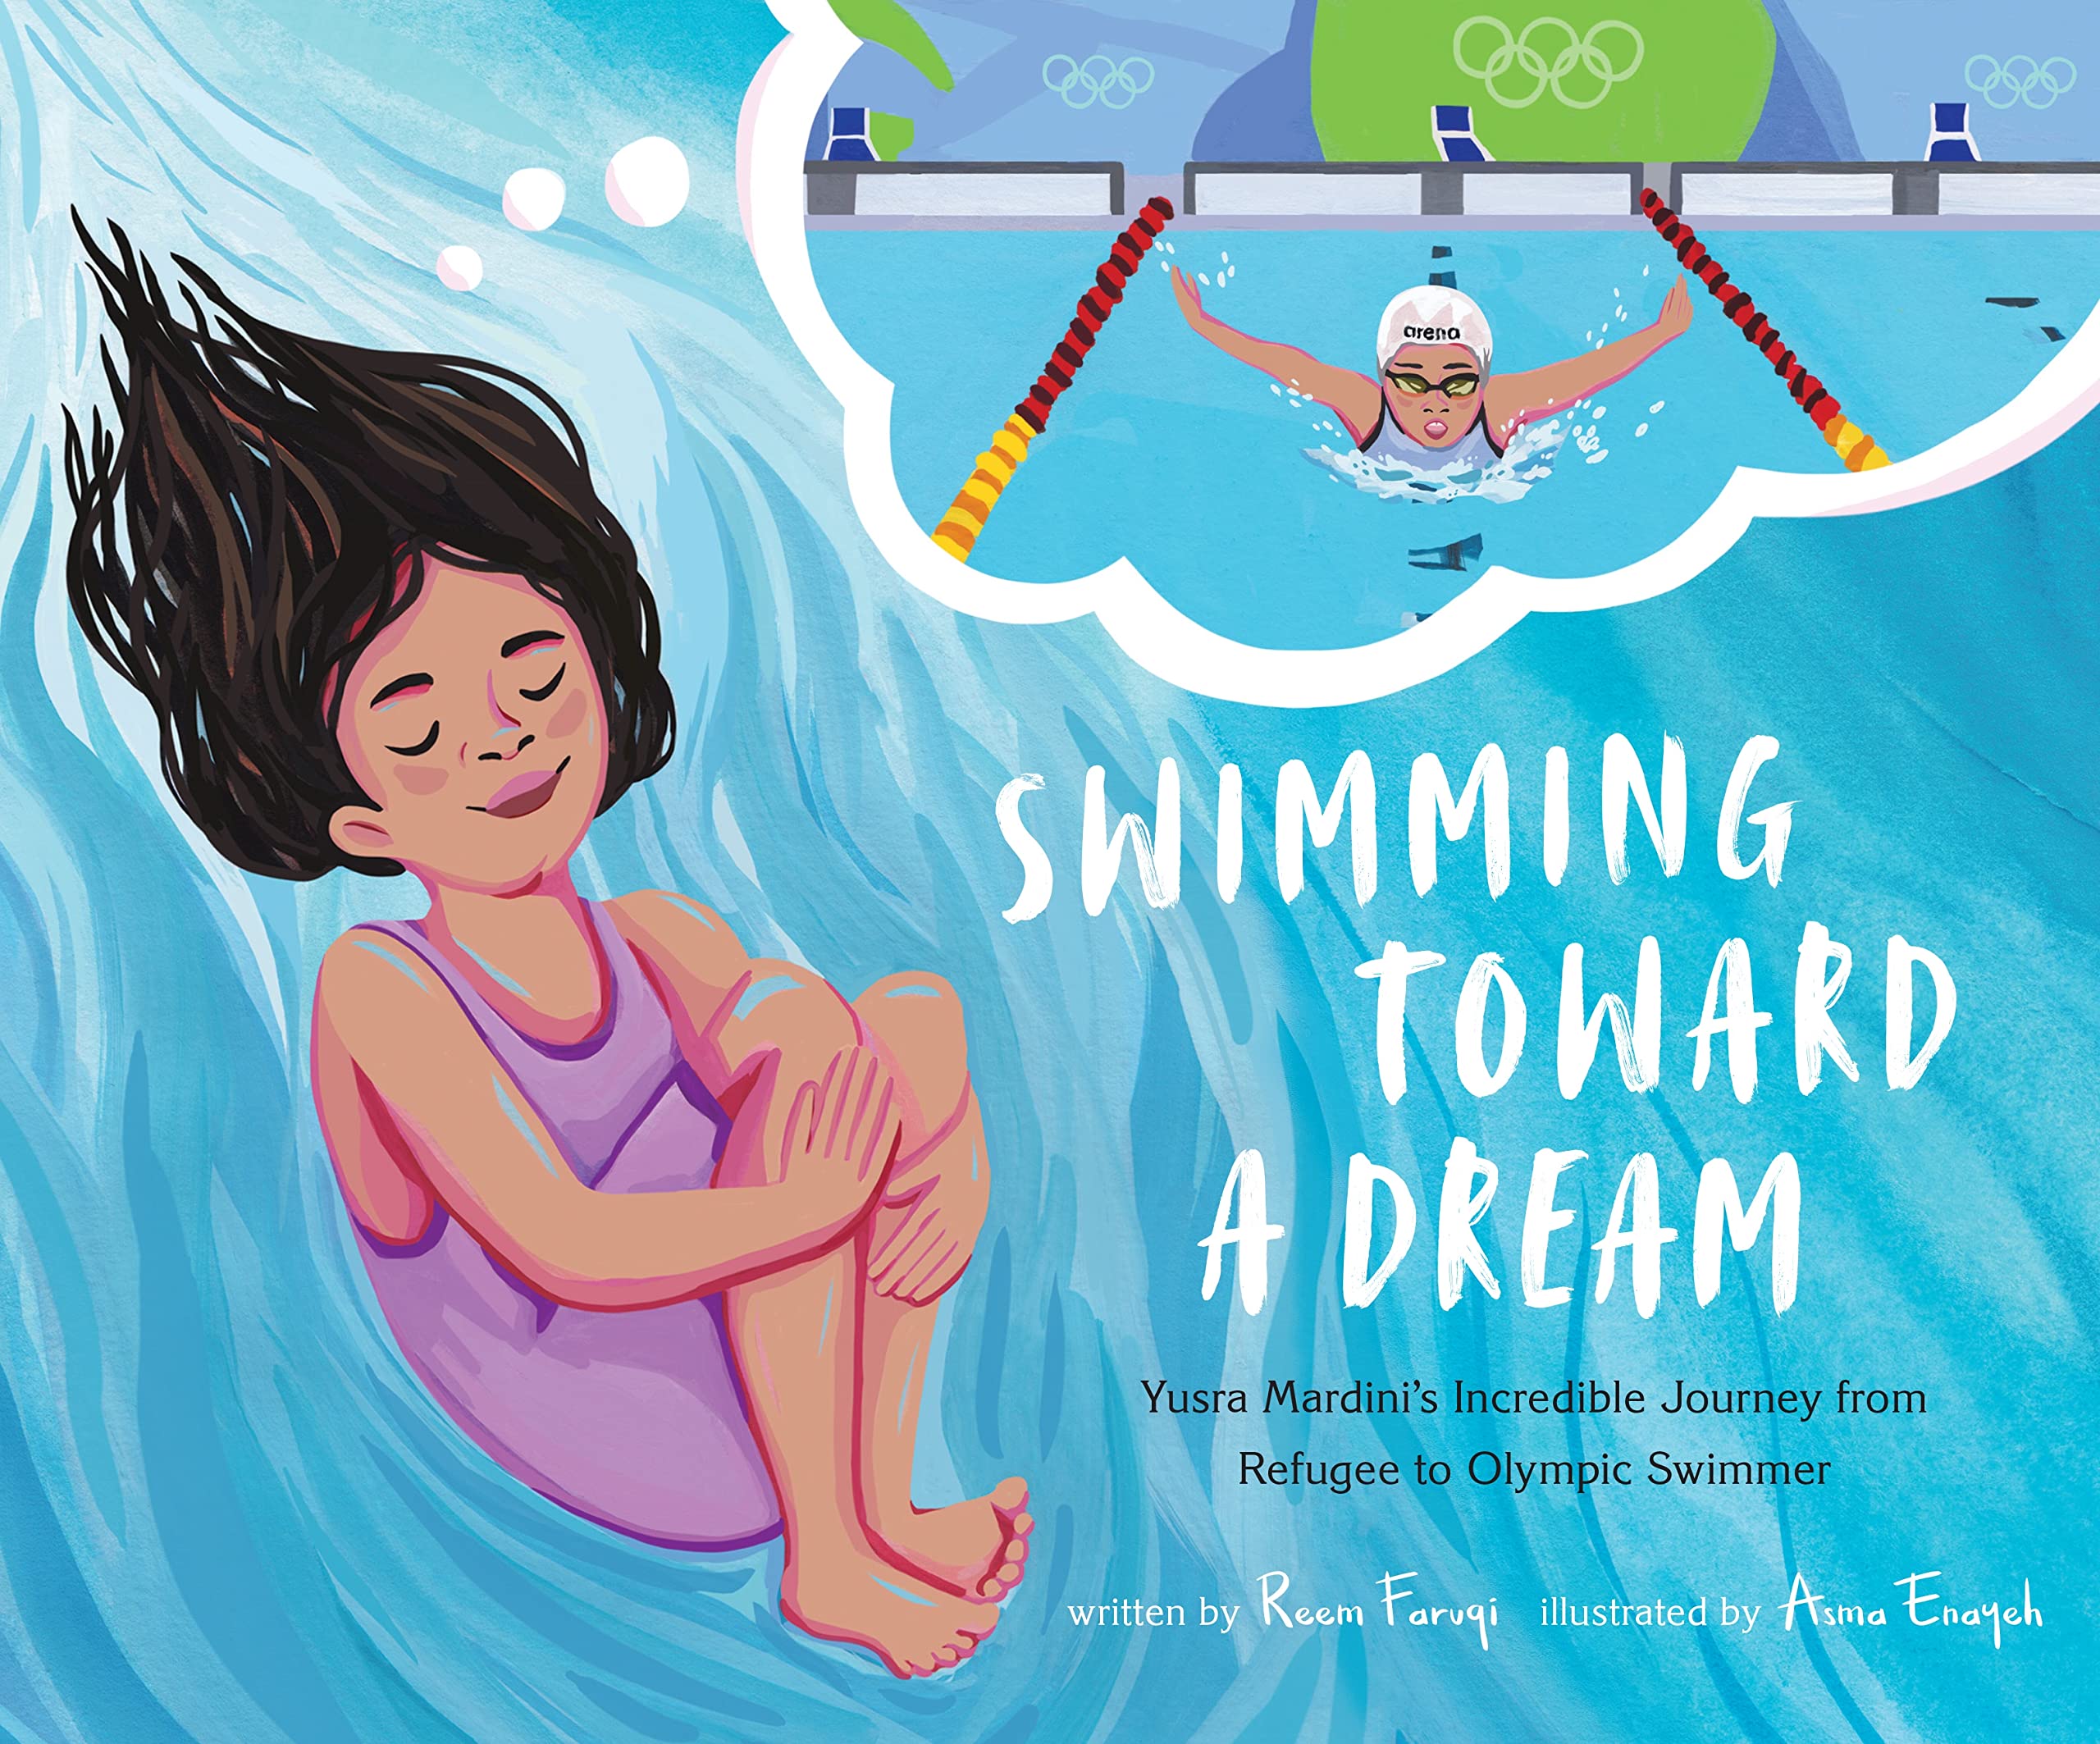 Cover with title and author and illustration of girl dreaming of swimming